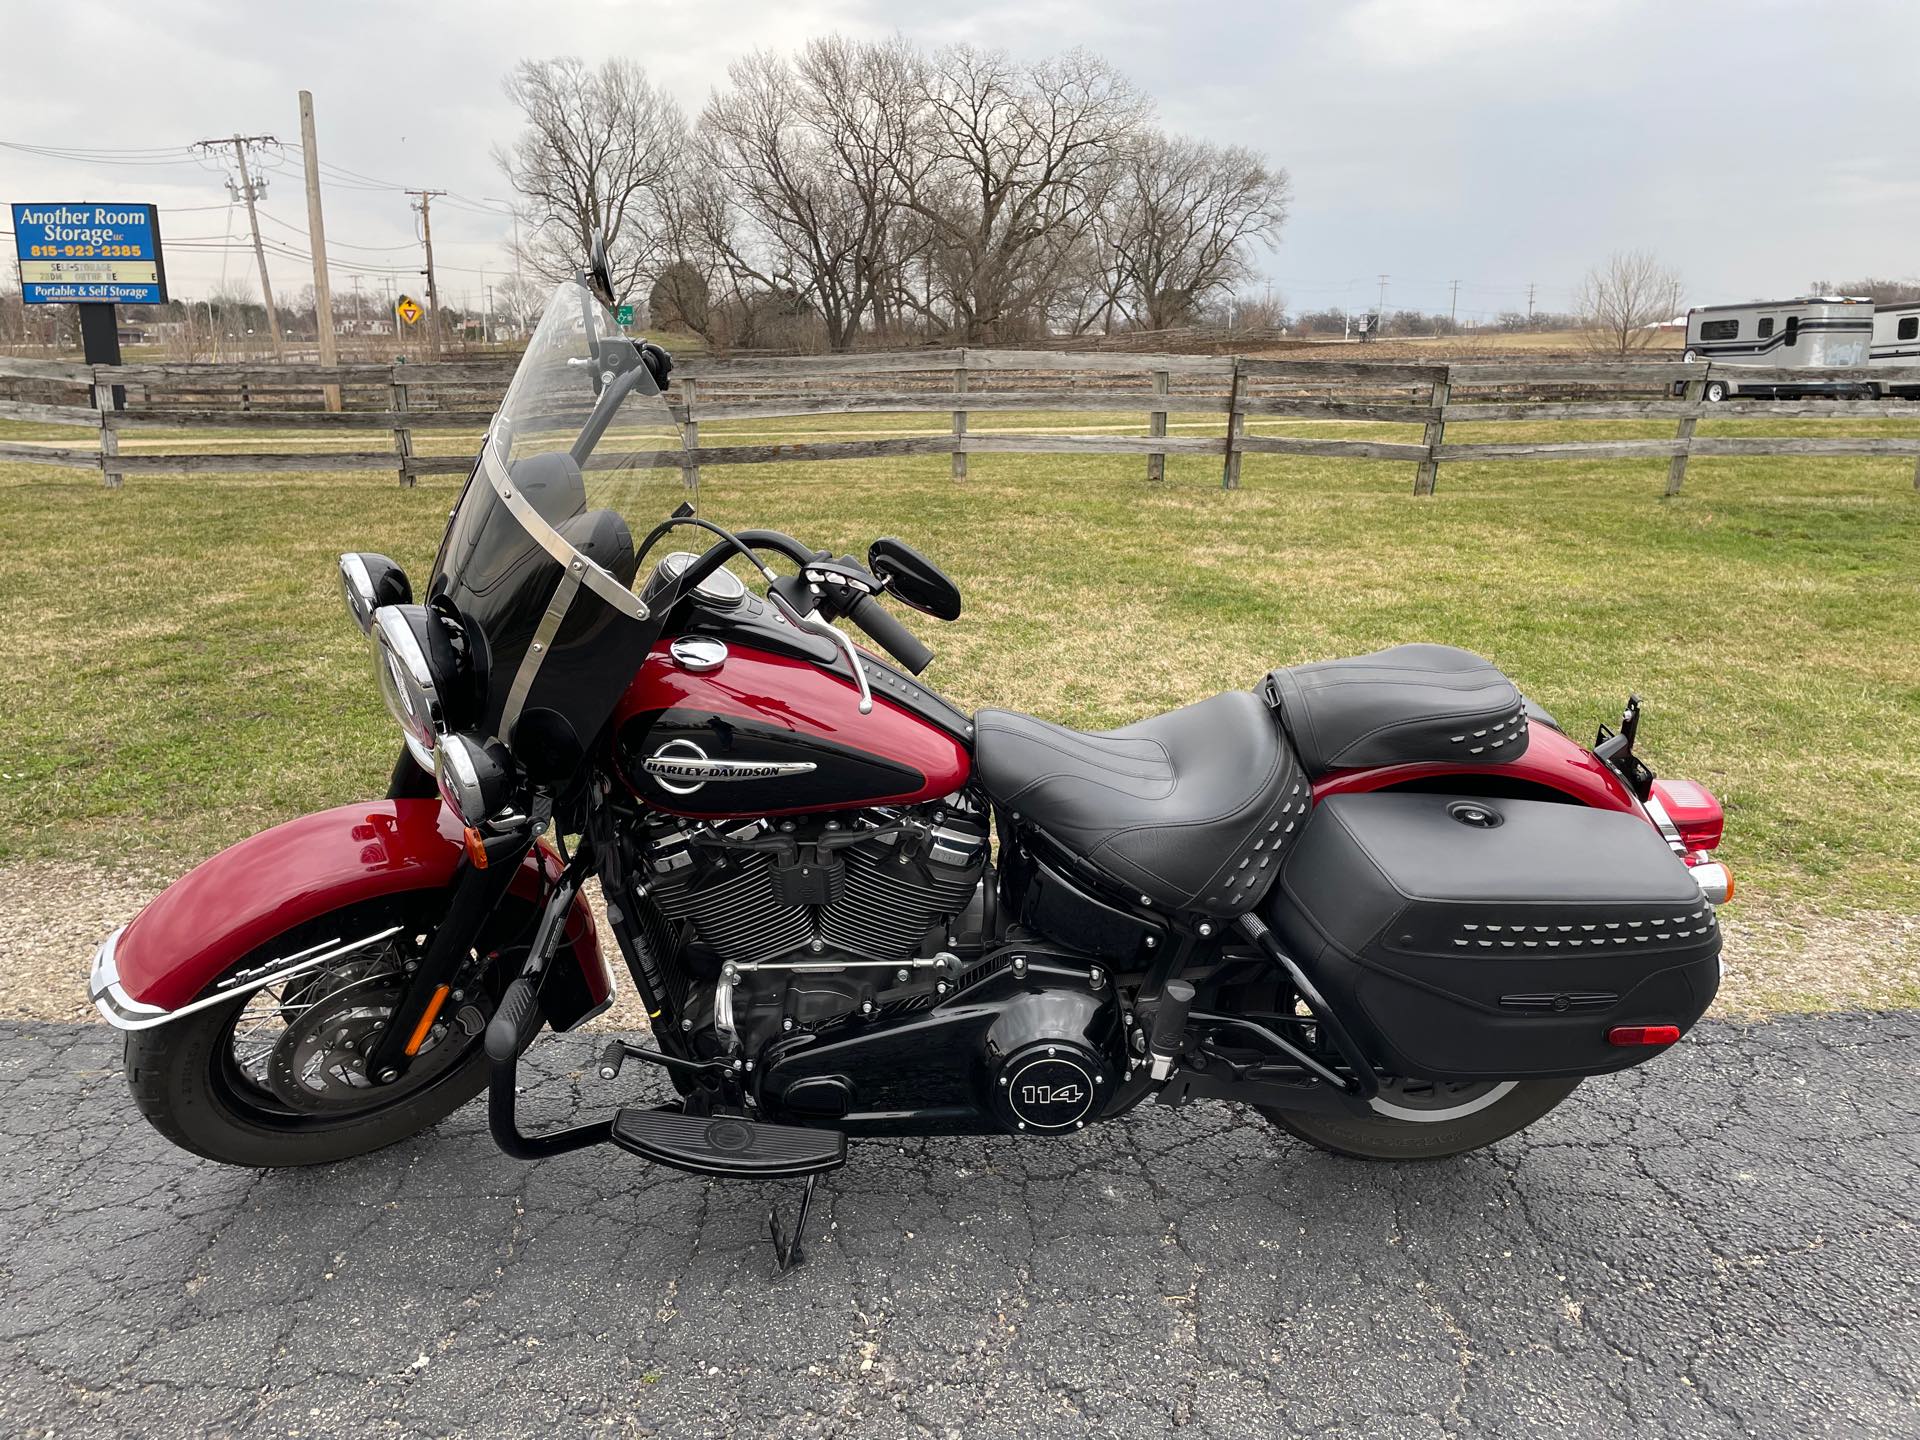 2020 Harley-Davidson SOFTAIL Heritage Classic 114 at Randy's Cycle